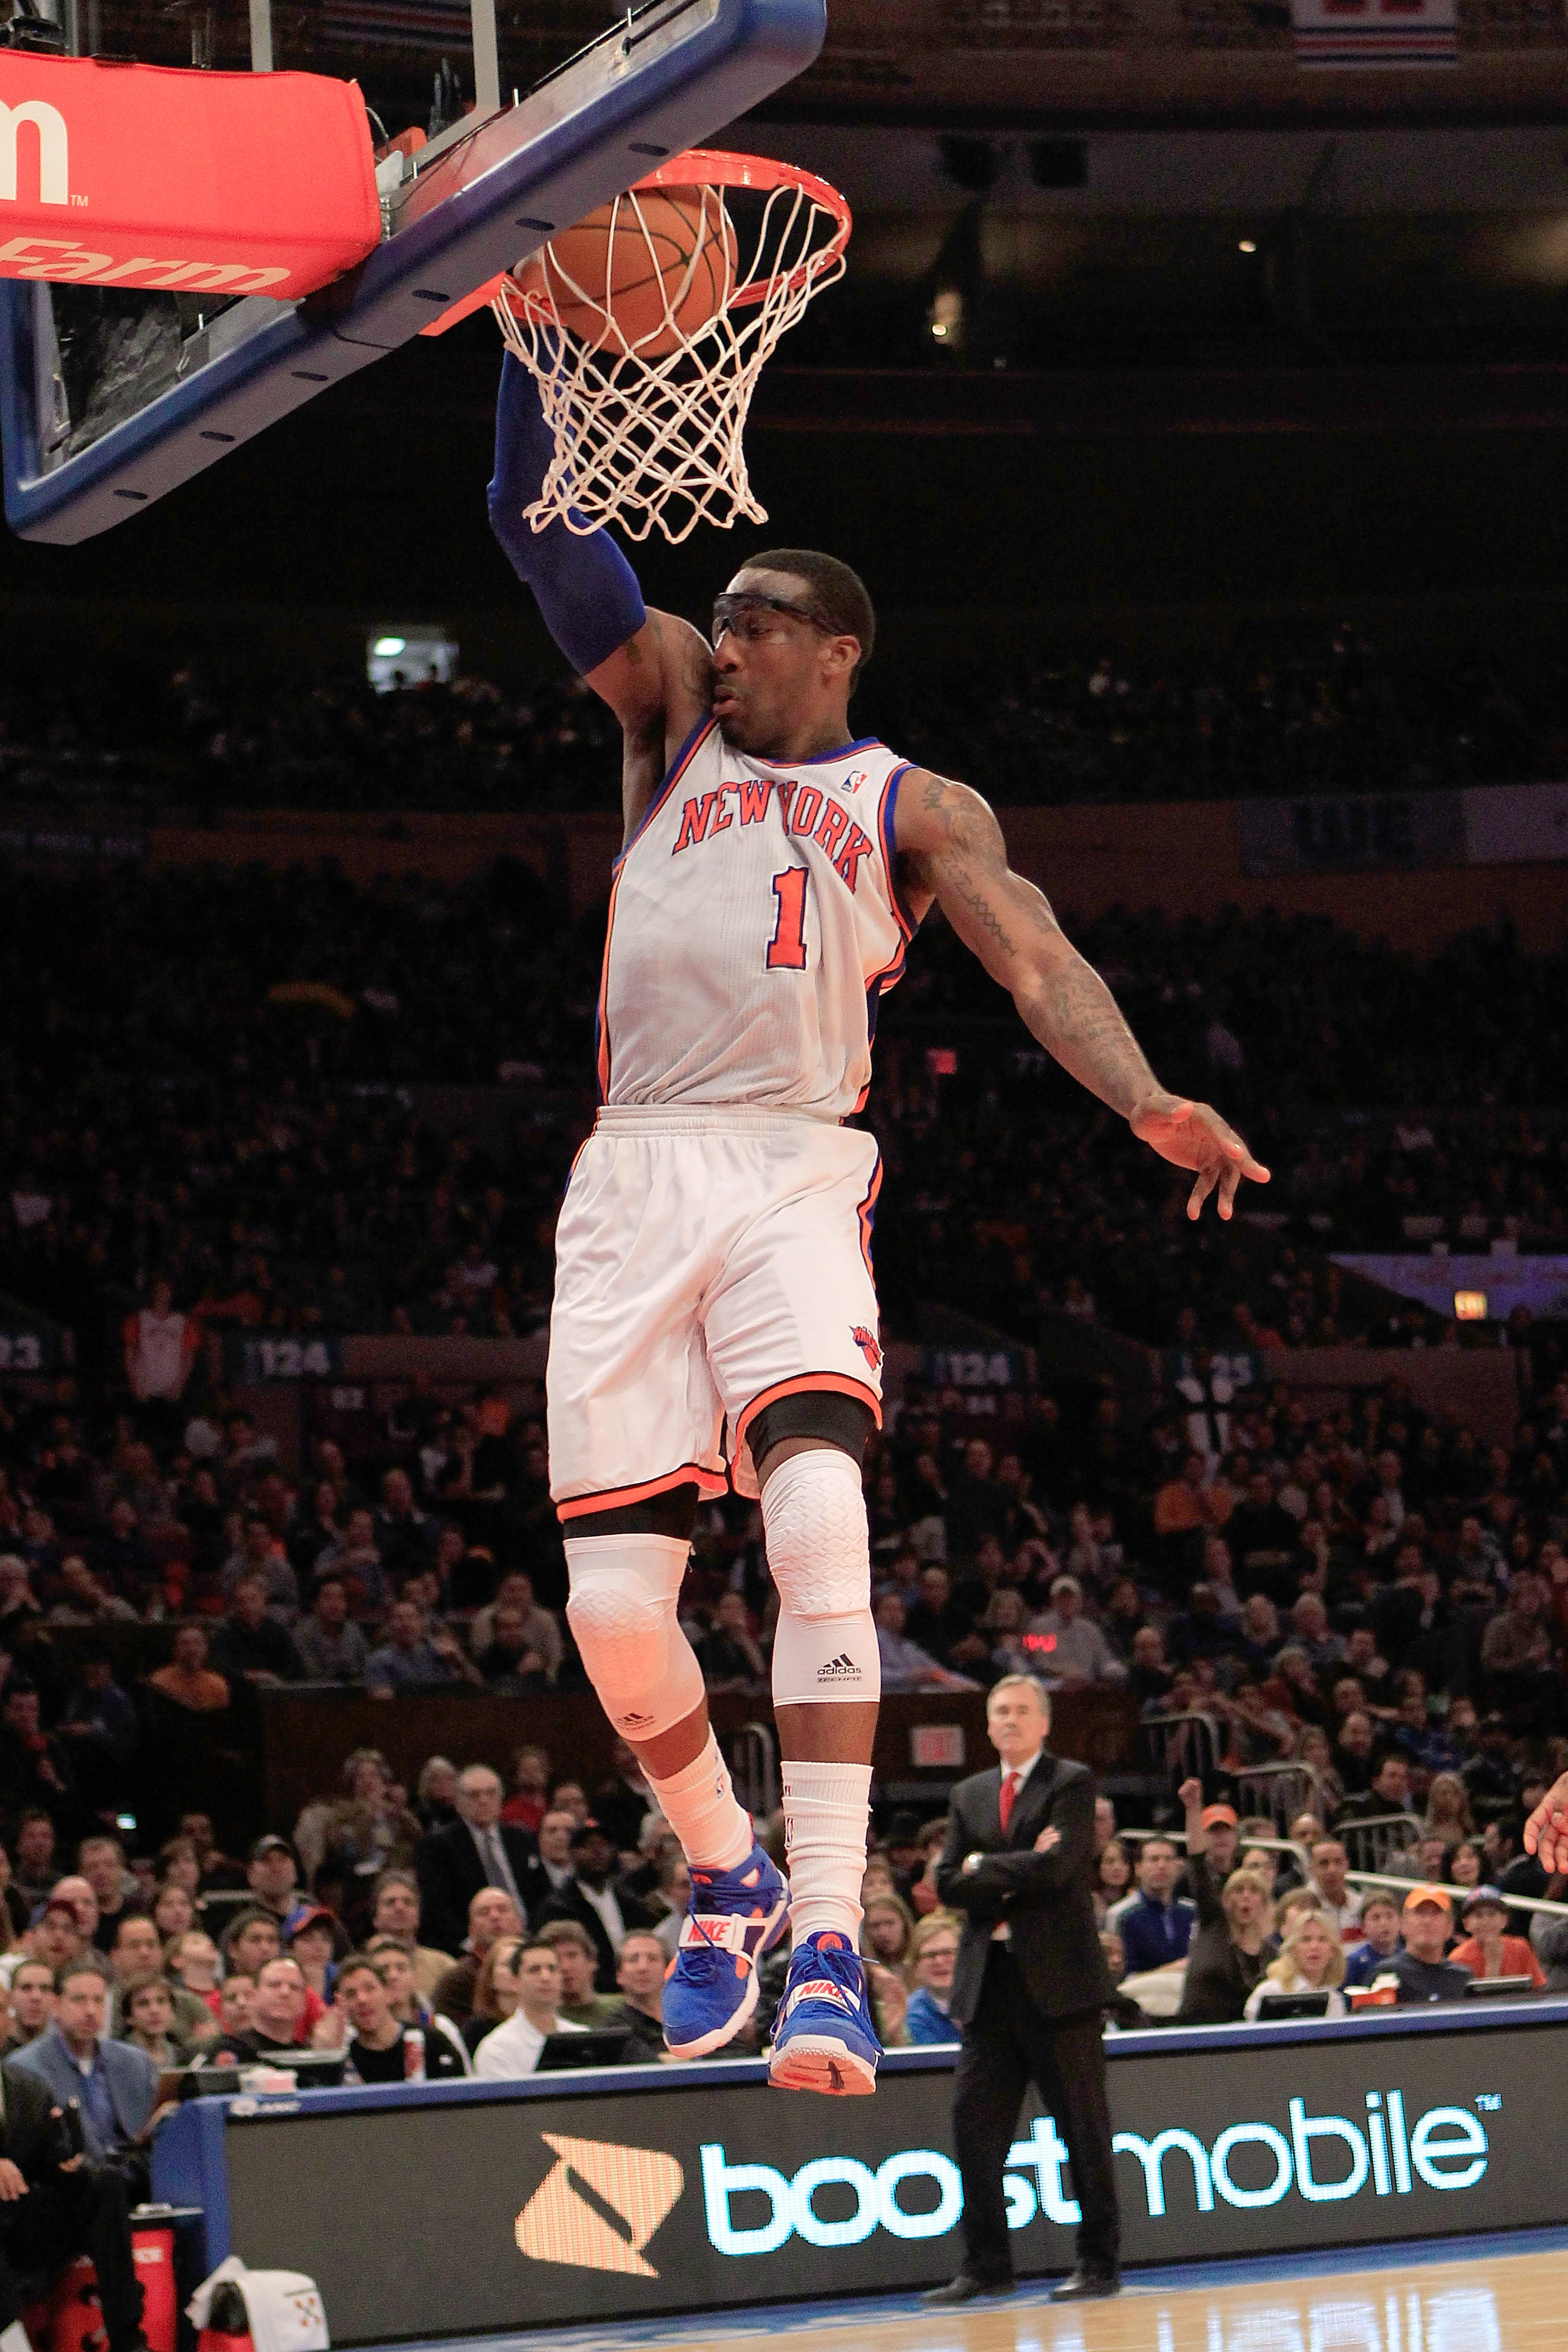 NEW YORK, NY - FEBRUARY 06:  Amar'e Stoudemire #1 of the New York Knicks dunks the ball against the Philadelphia 76ers at Madison Square Garden on February 6, 2011 in New York City. NOTE TO USER: User expressly acknowledges and agrees that, by downloading